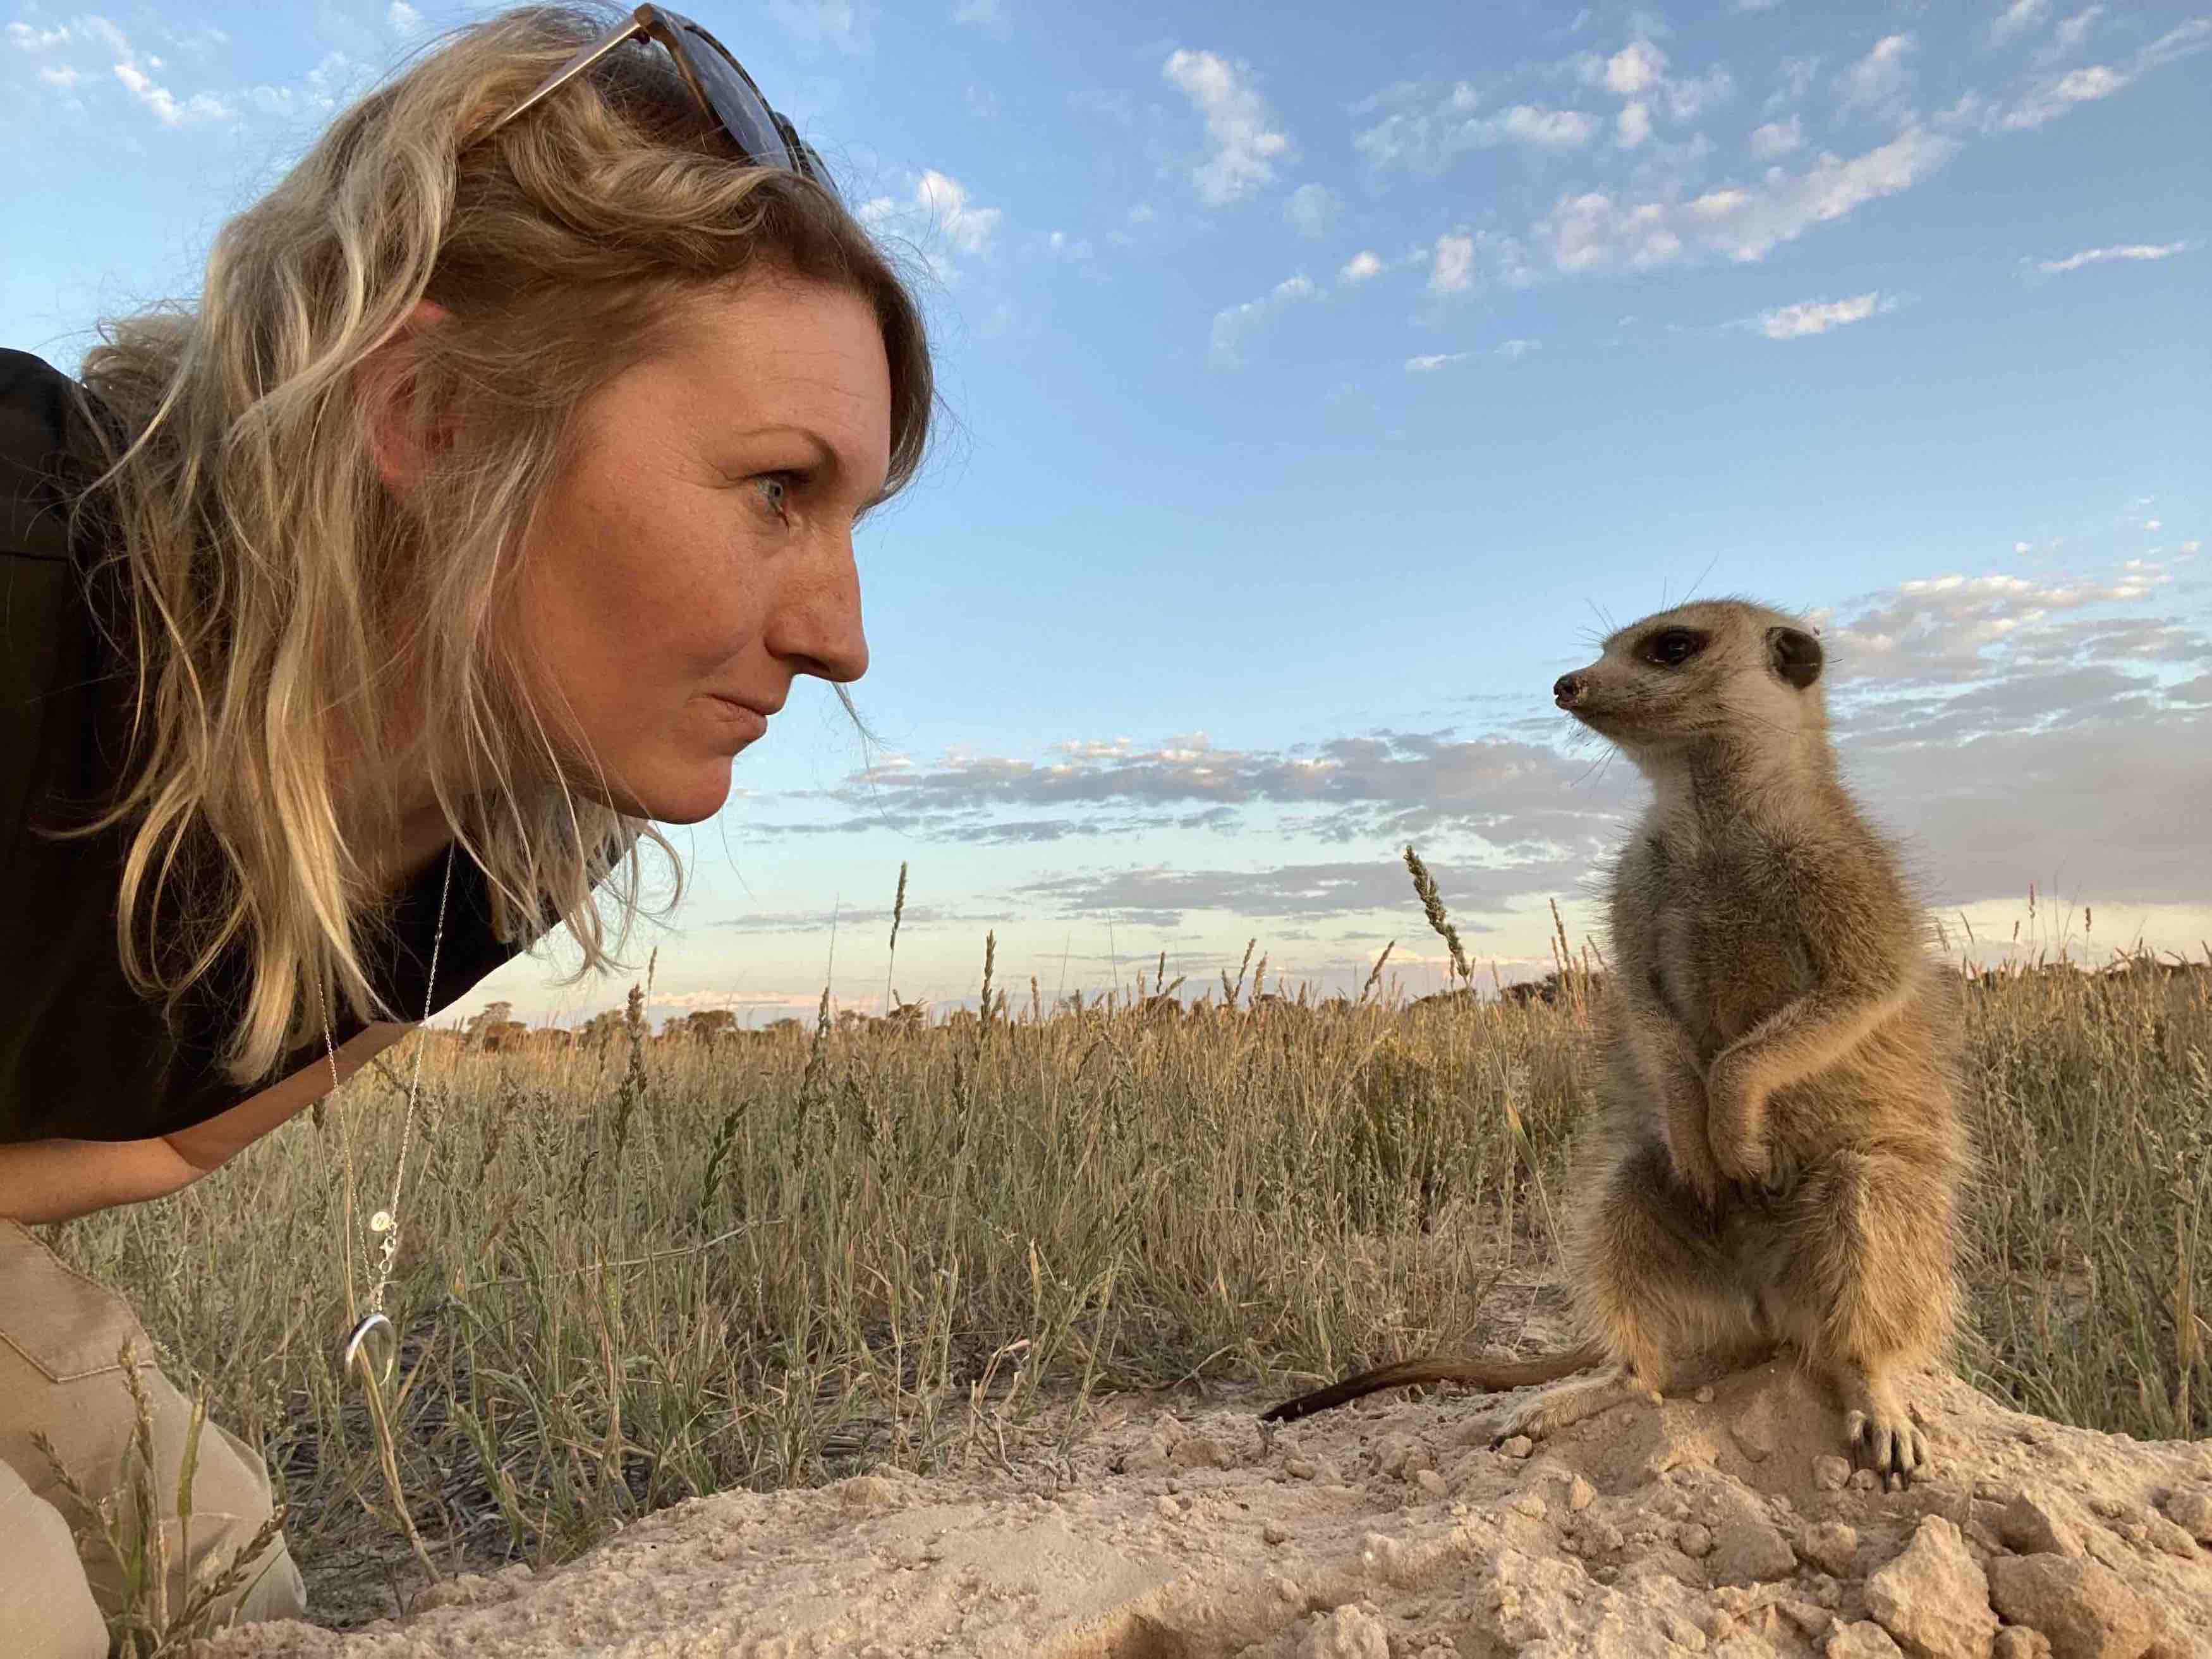 A photo of a woman and a meerkat